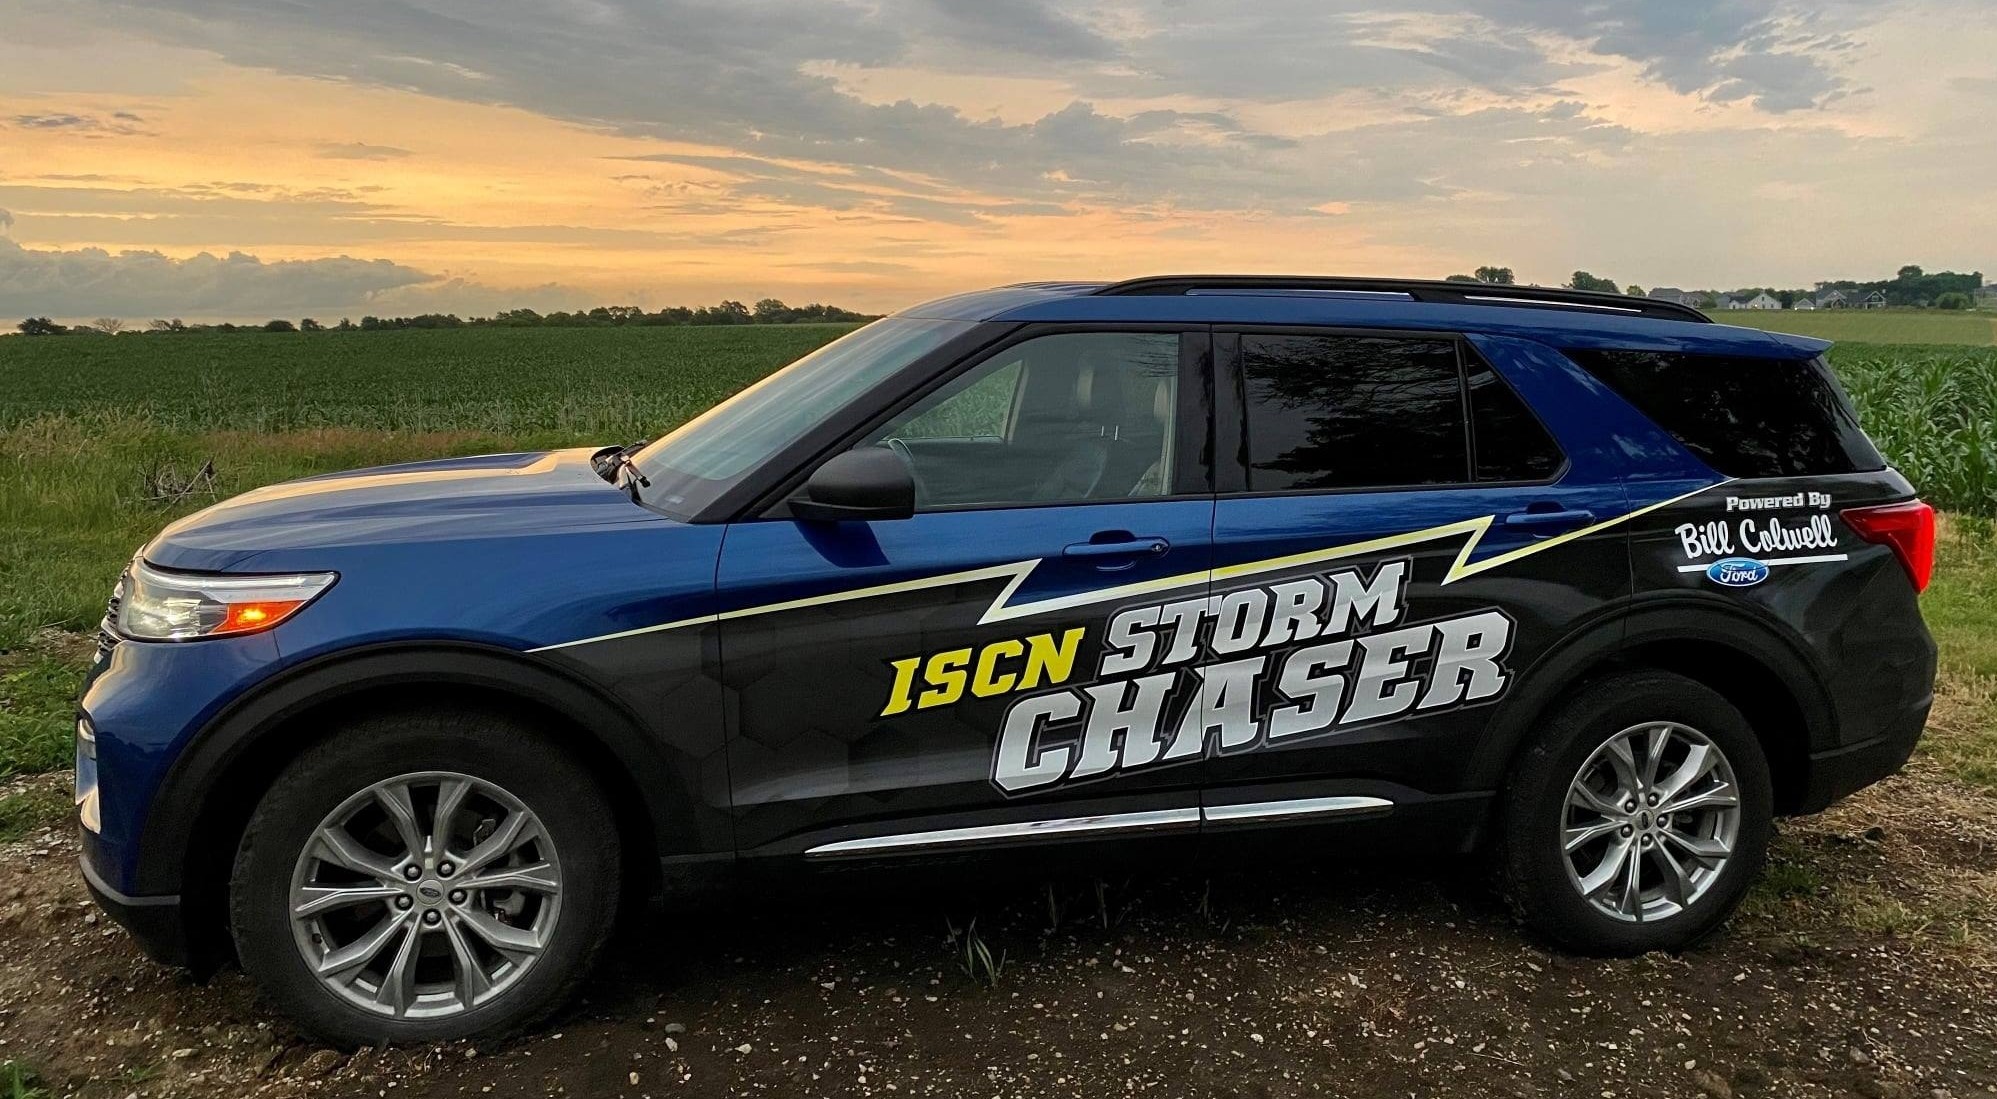 ISCN Storm Chaser powered by Bill Colwell Ford